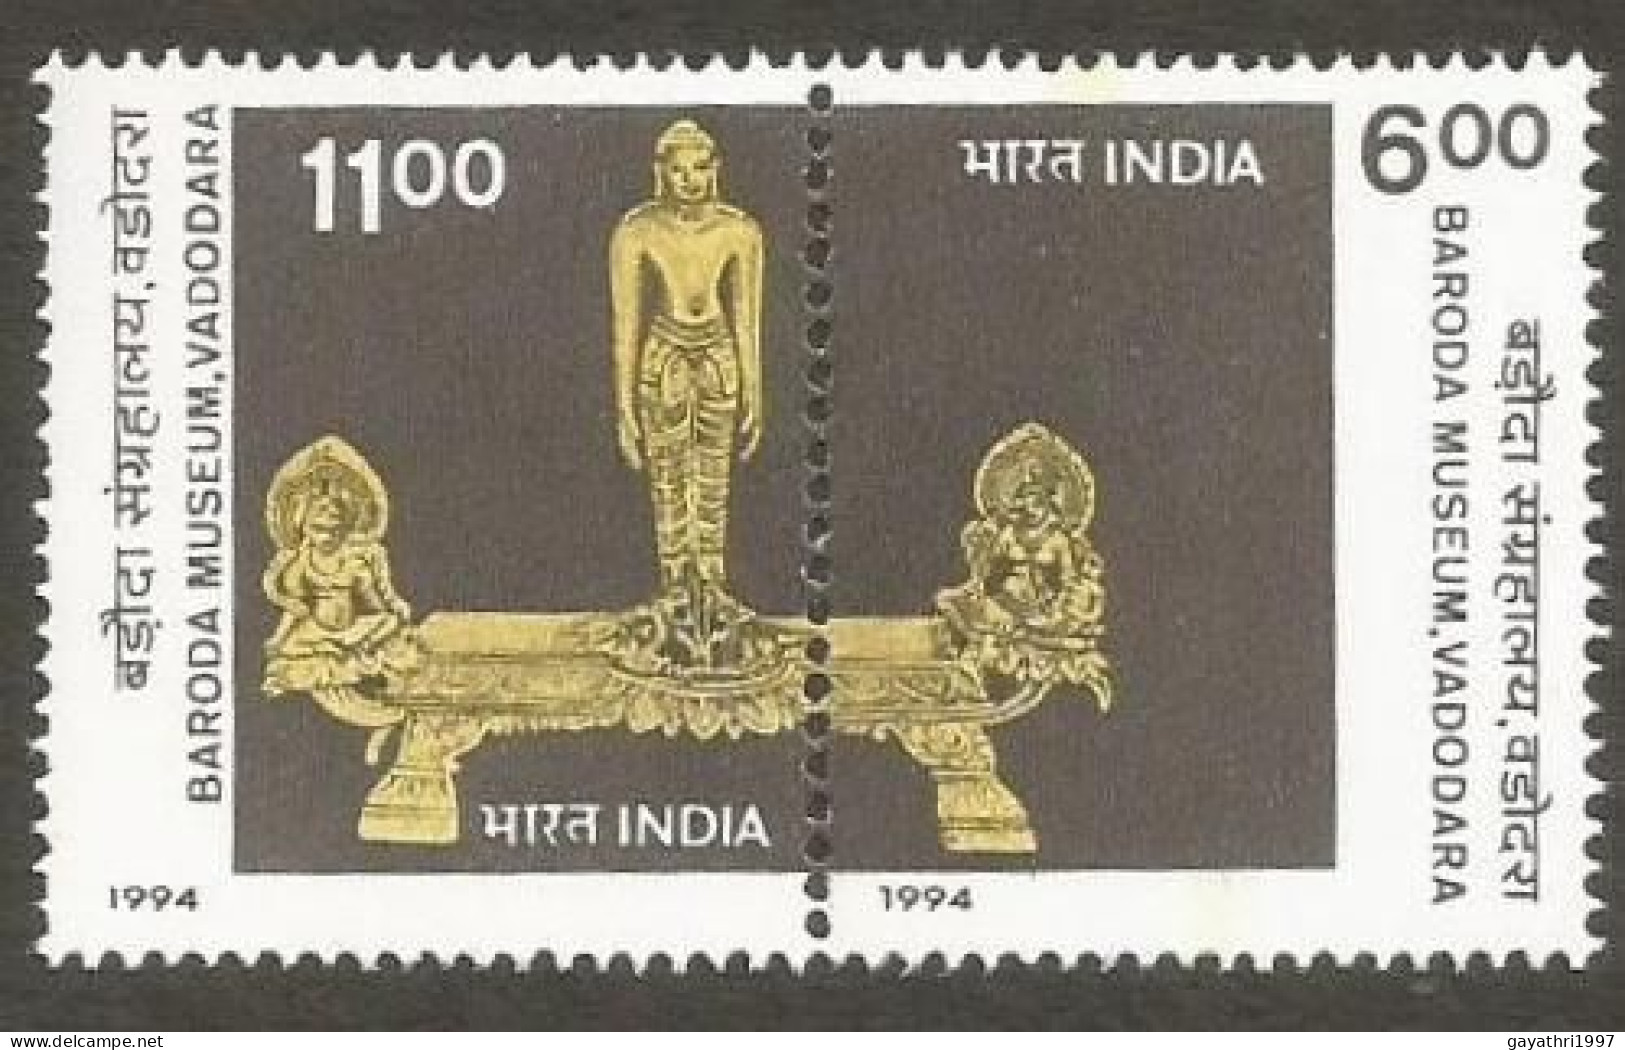 India 1994 Baroda Museum Se-tenant Mint MNH Good Condition (PST - 34) - Unused Stamps